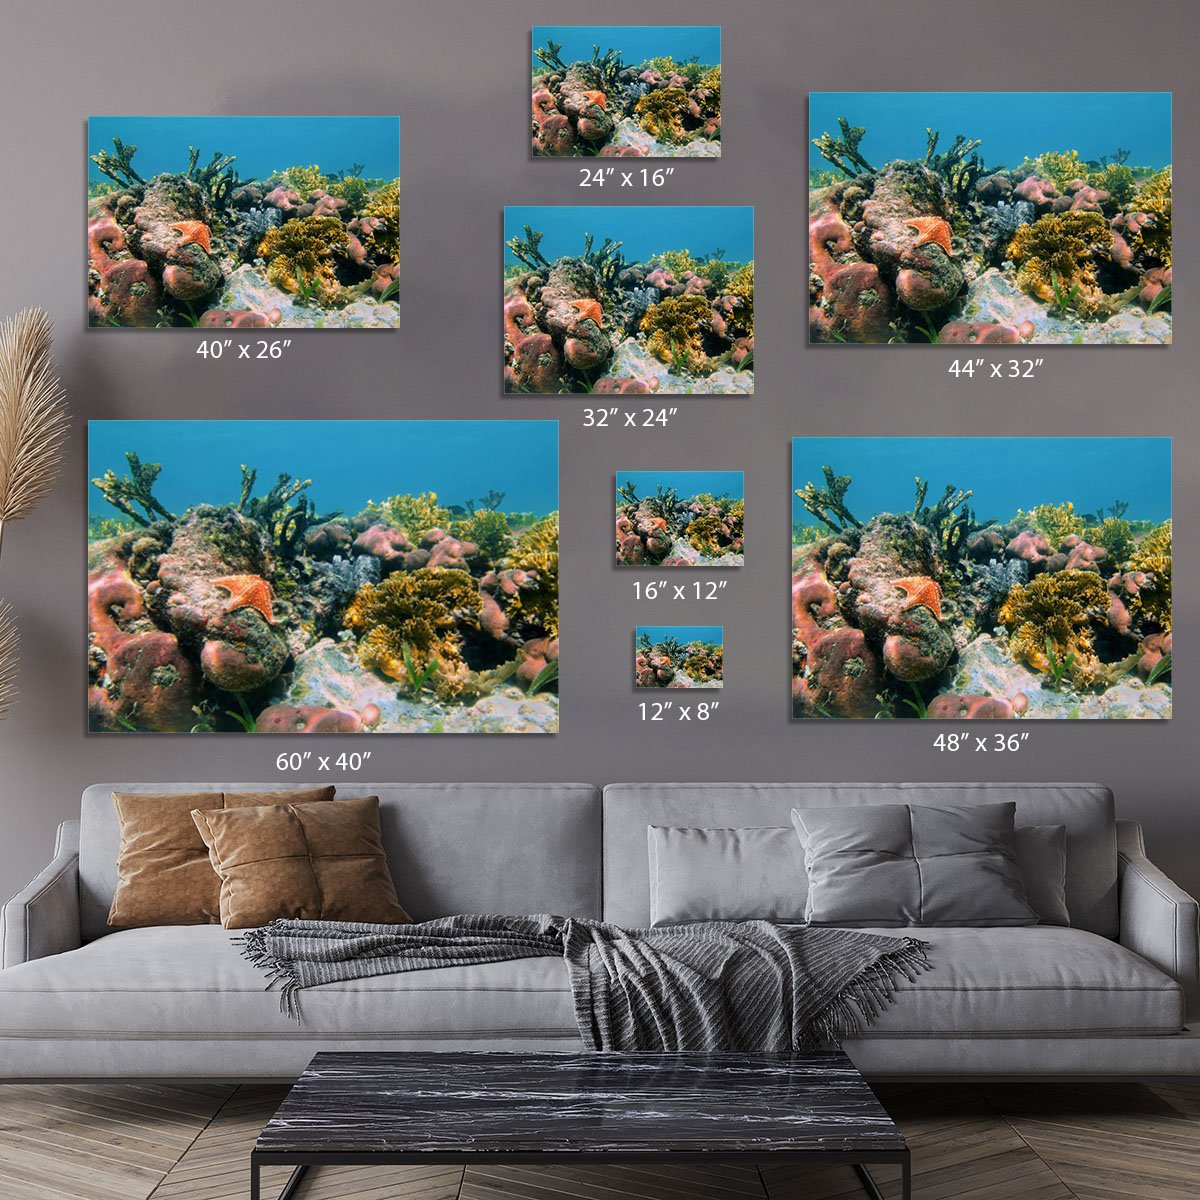 Underwater reef in the Caribbean sea with corals sponges and a starfish Canvas Print or Poster